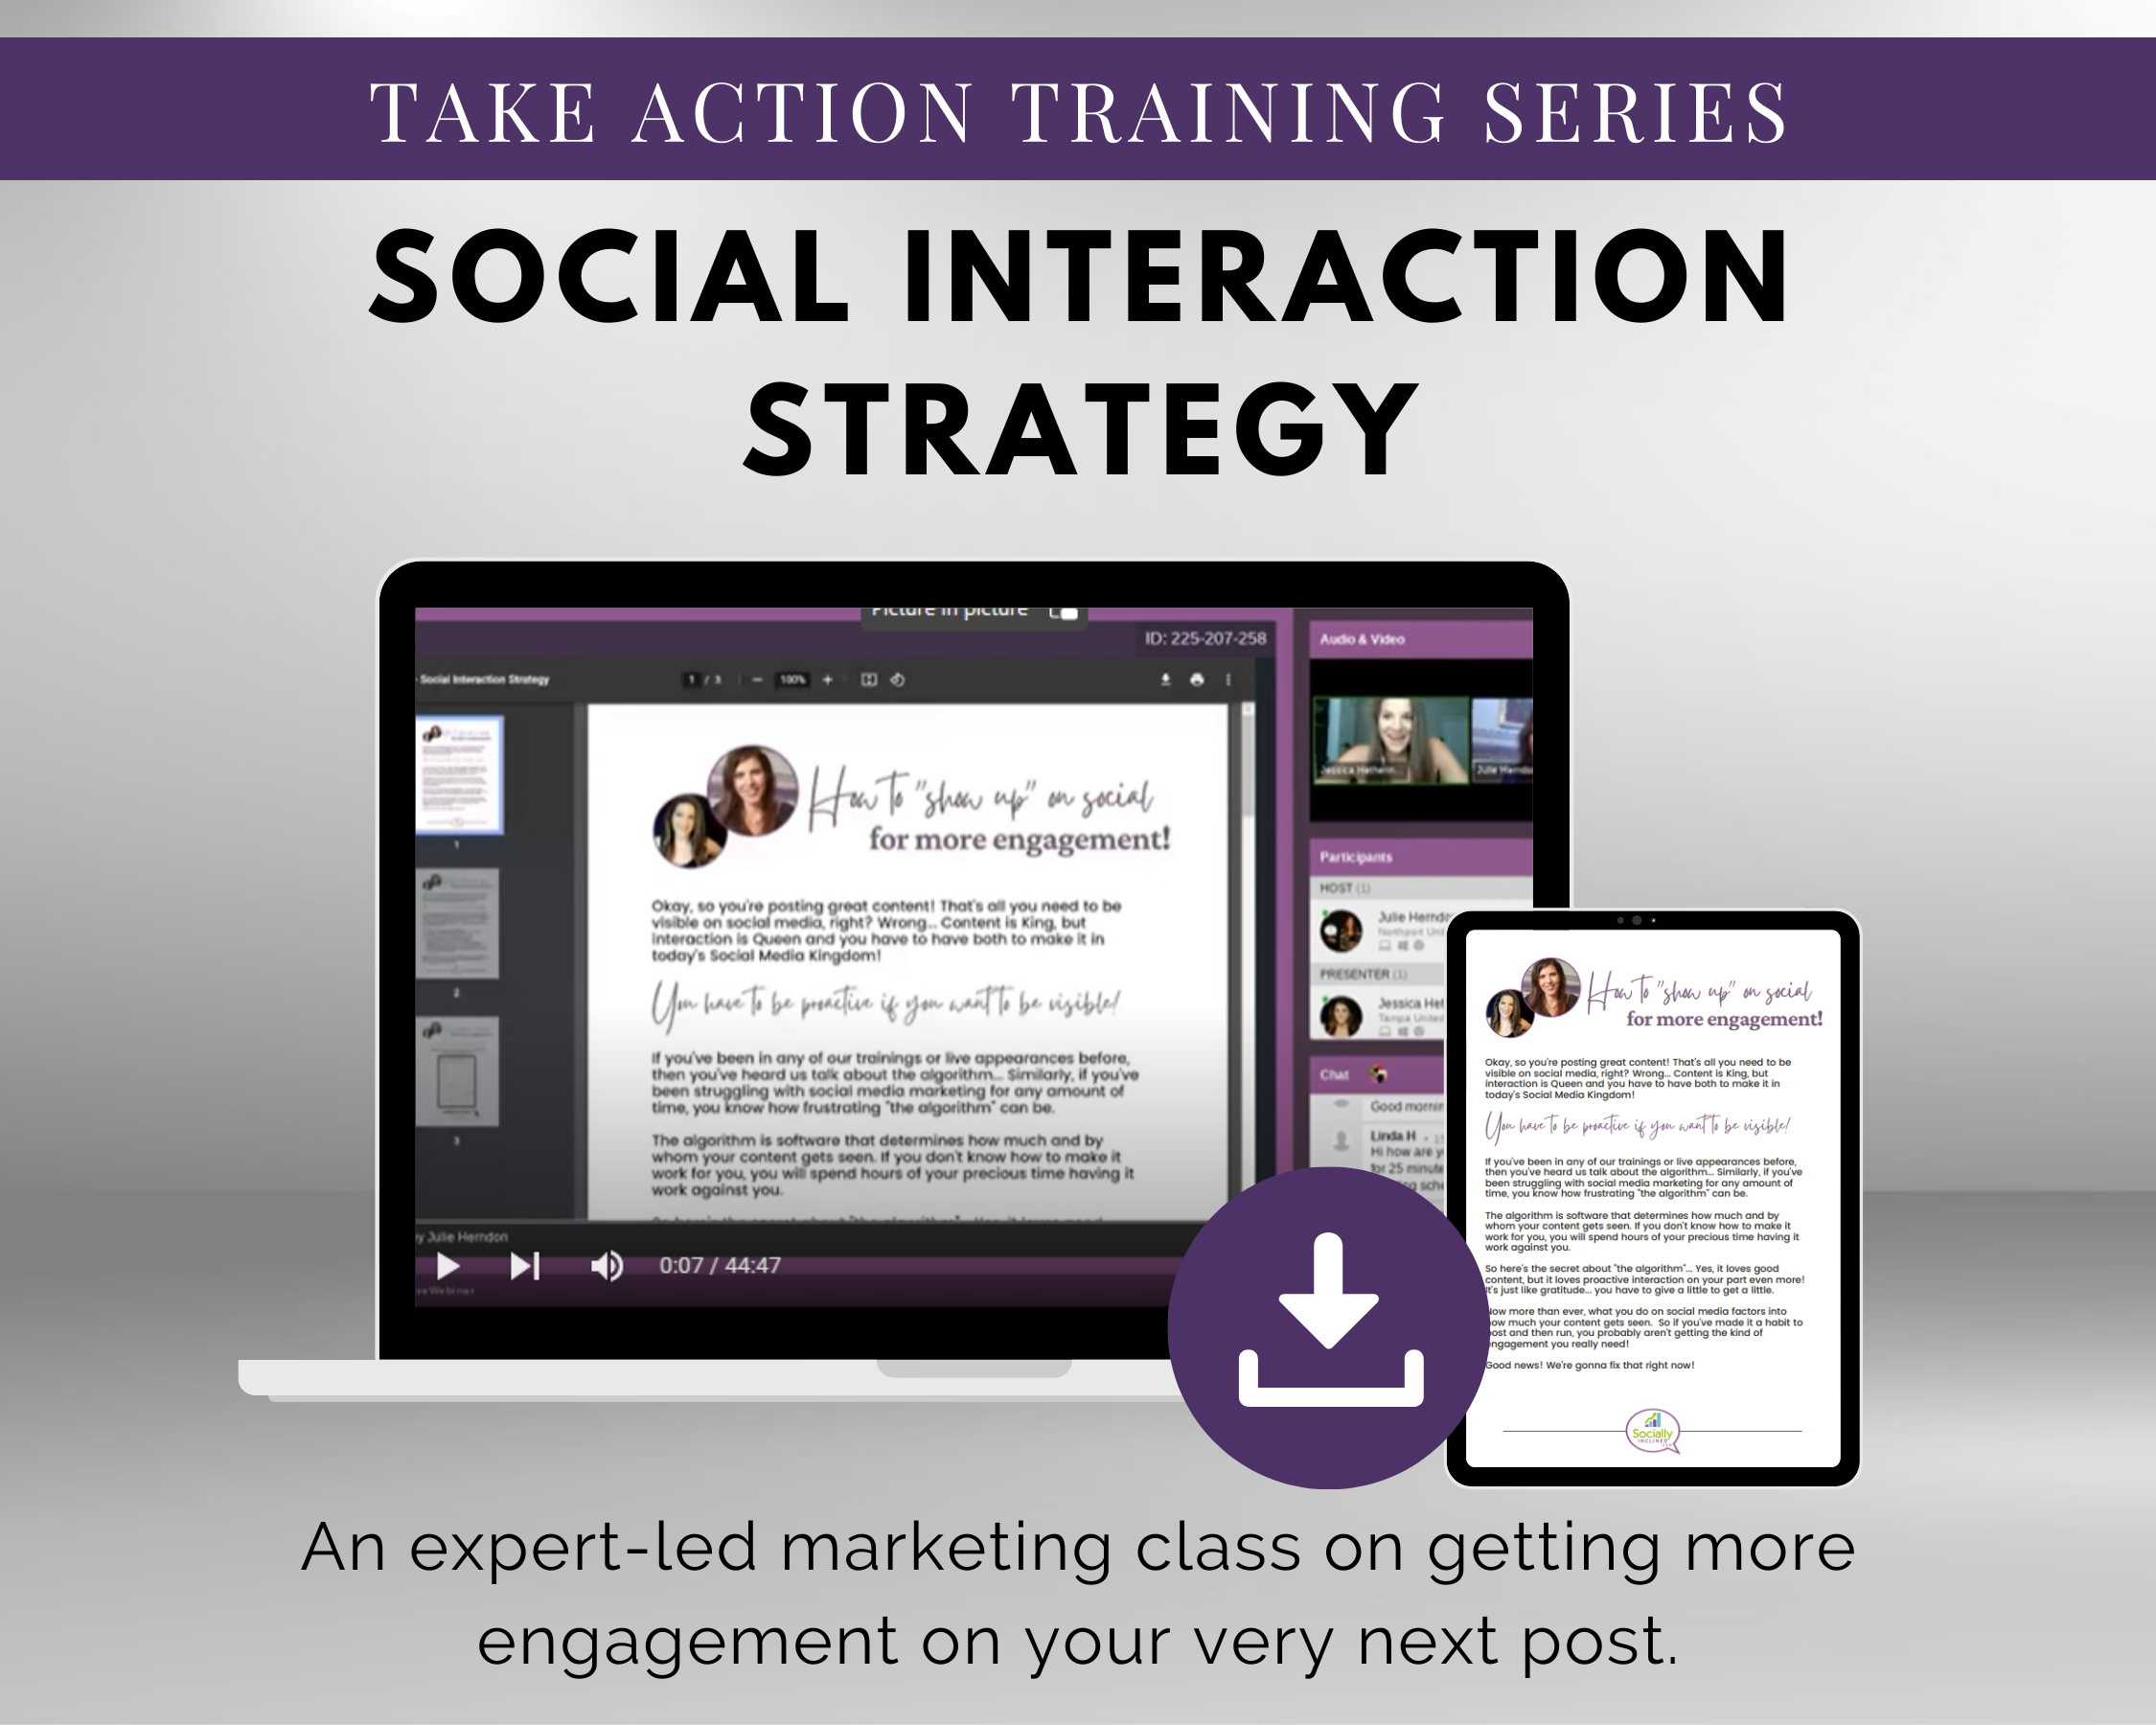 Improve your social interaction strategy with Get Socially Inclined's TAT - Social Interaction Strategy Masterclass training series.